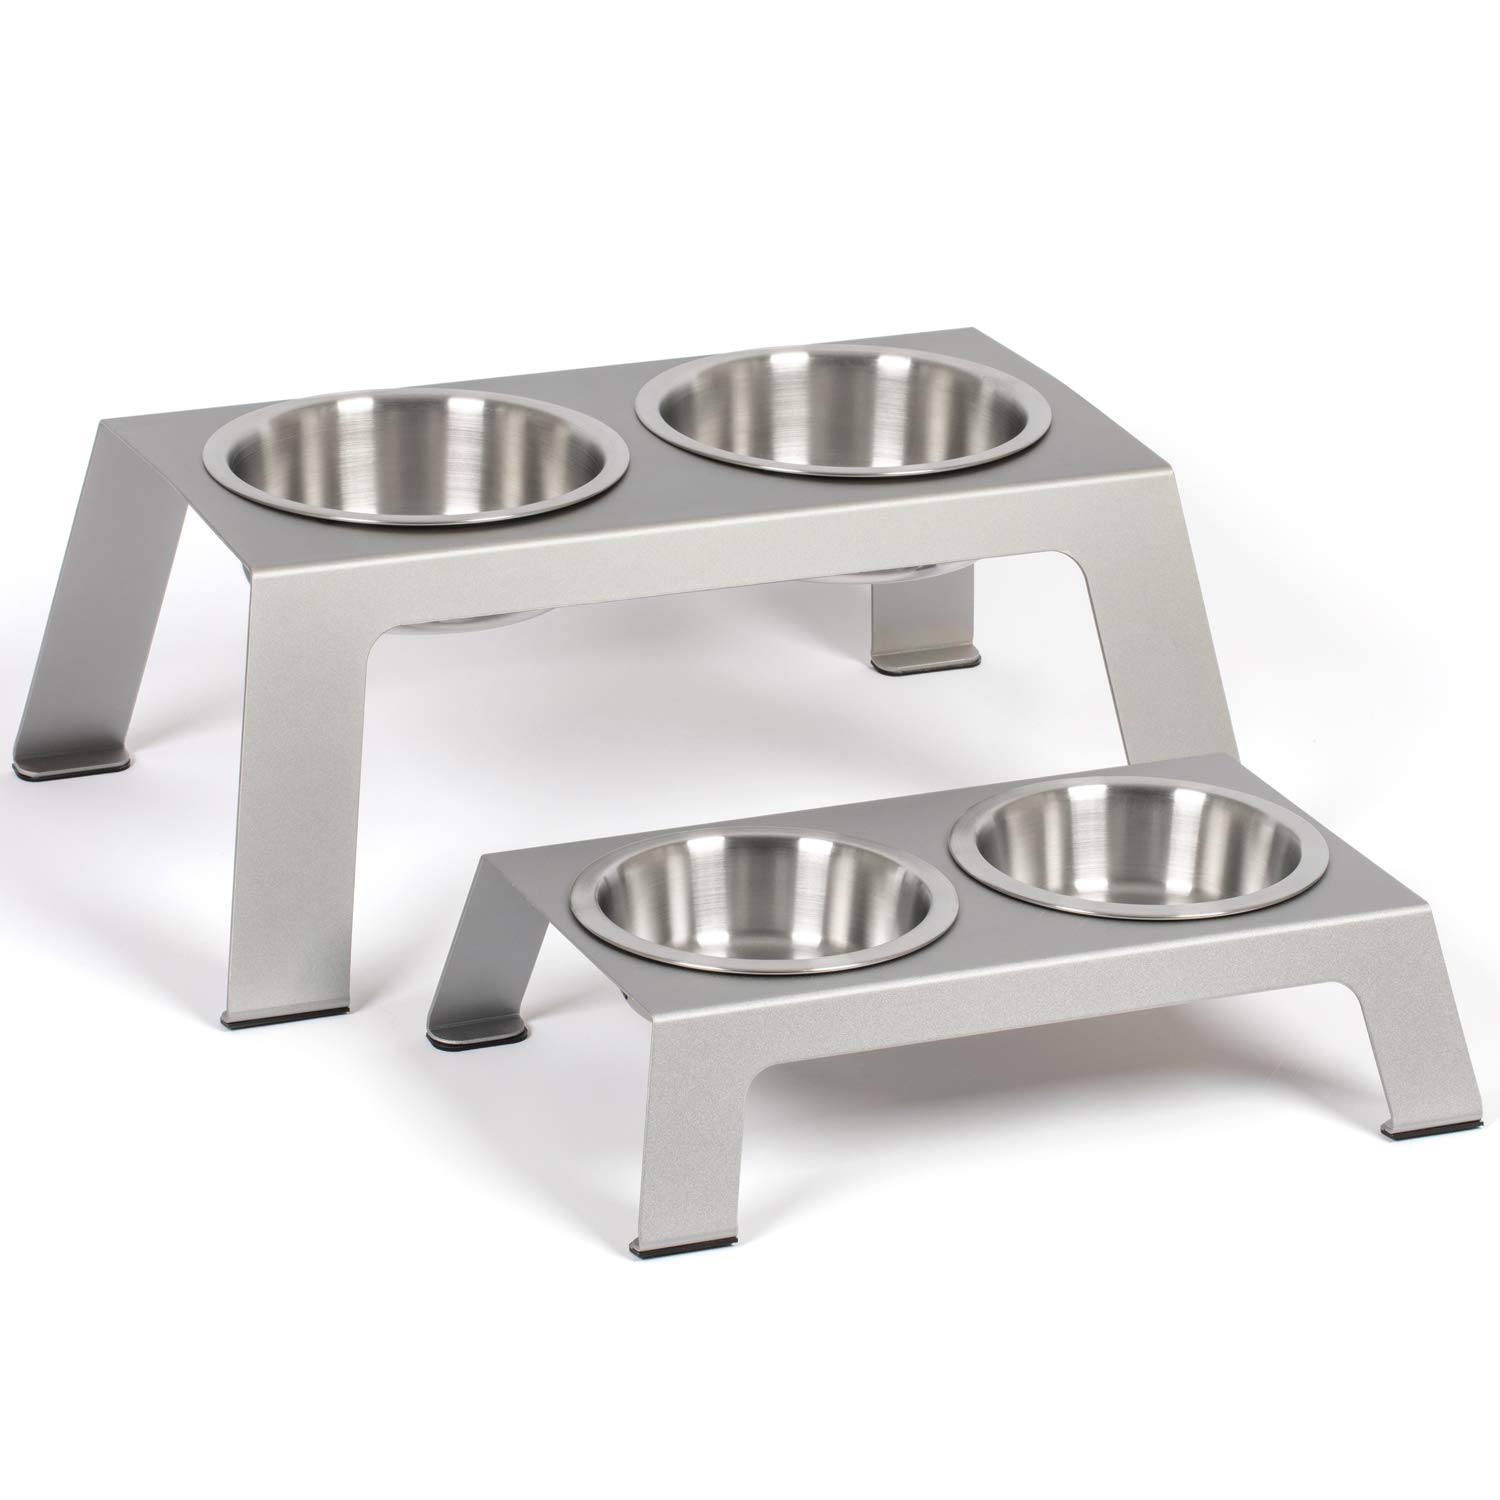 Elevated Dog Bowl Pet Feeding Station with 4 Stainless Steel Bowls